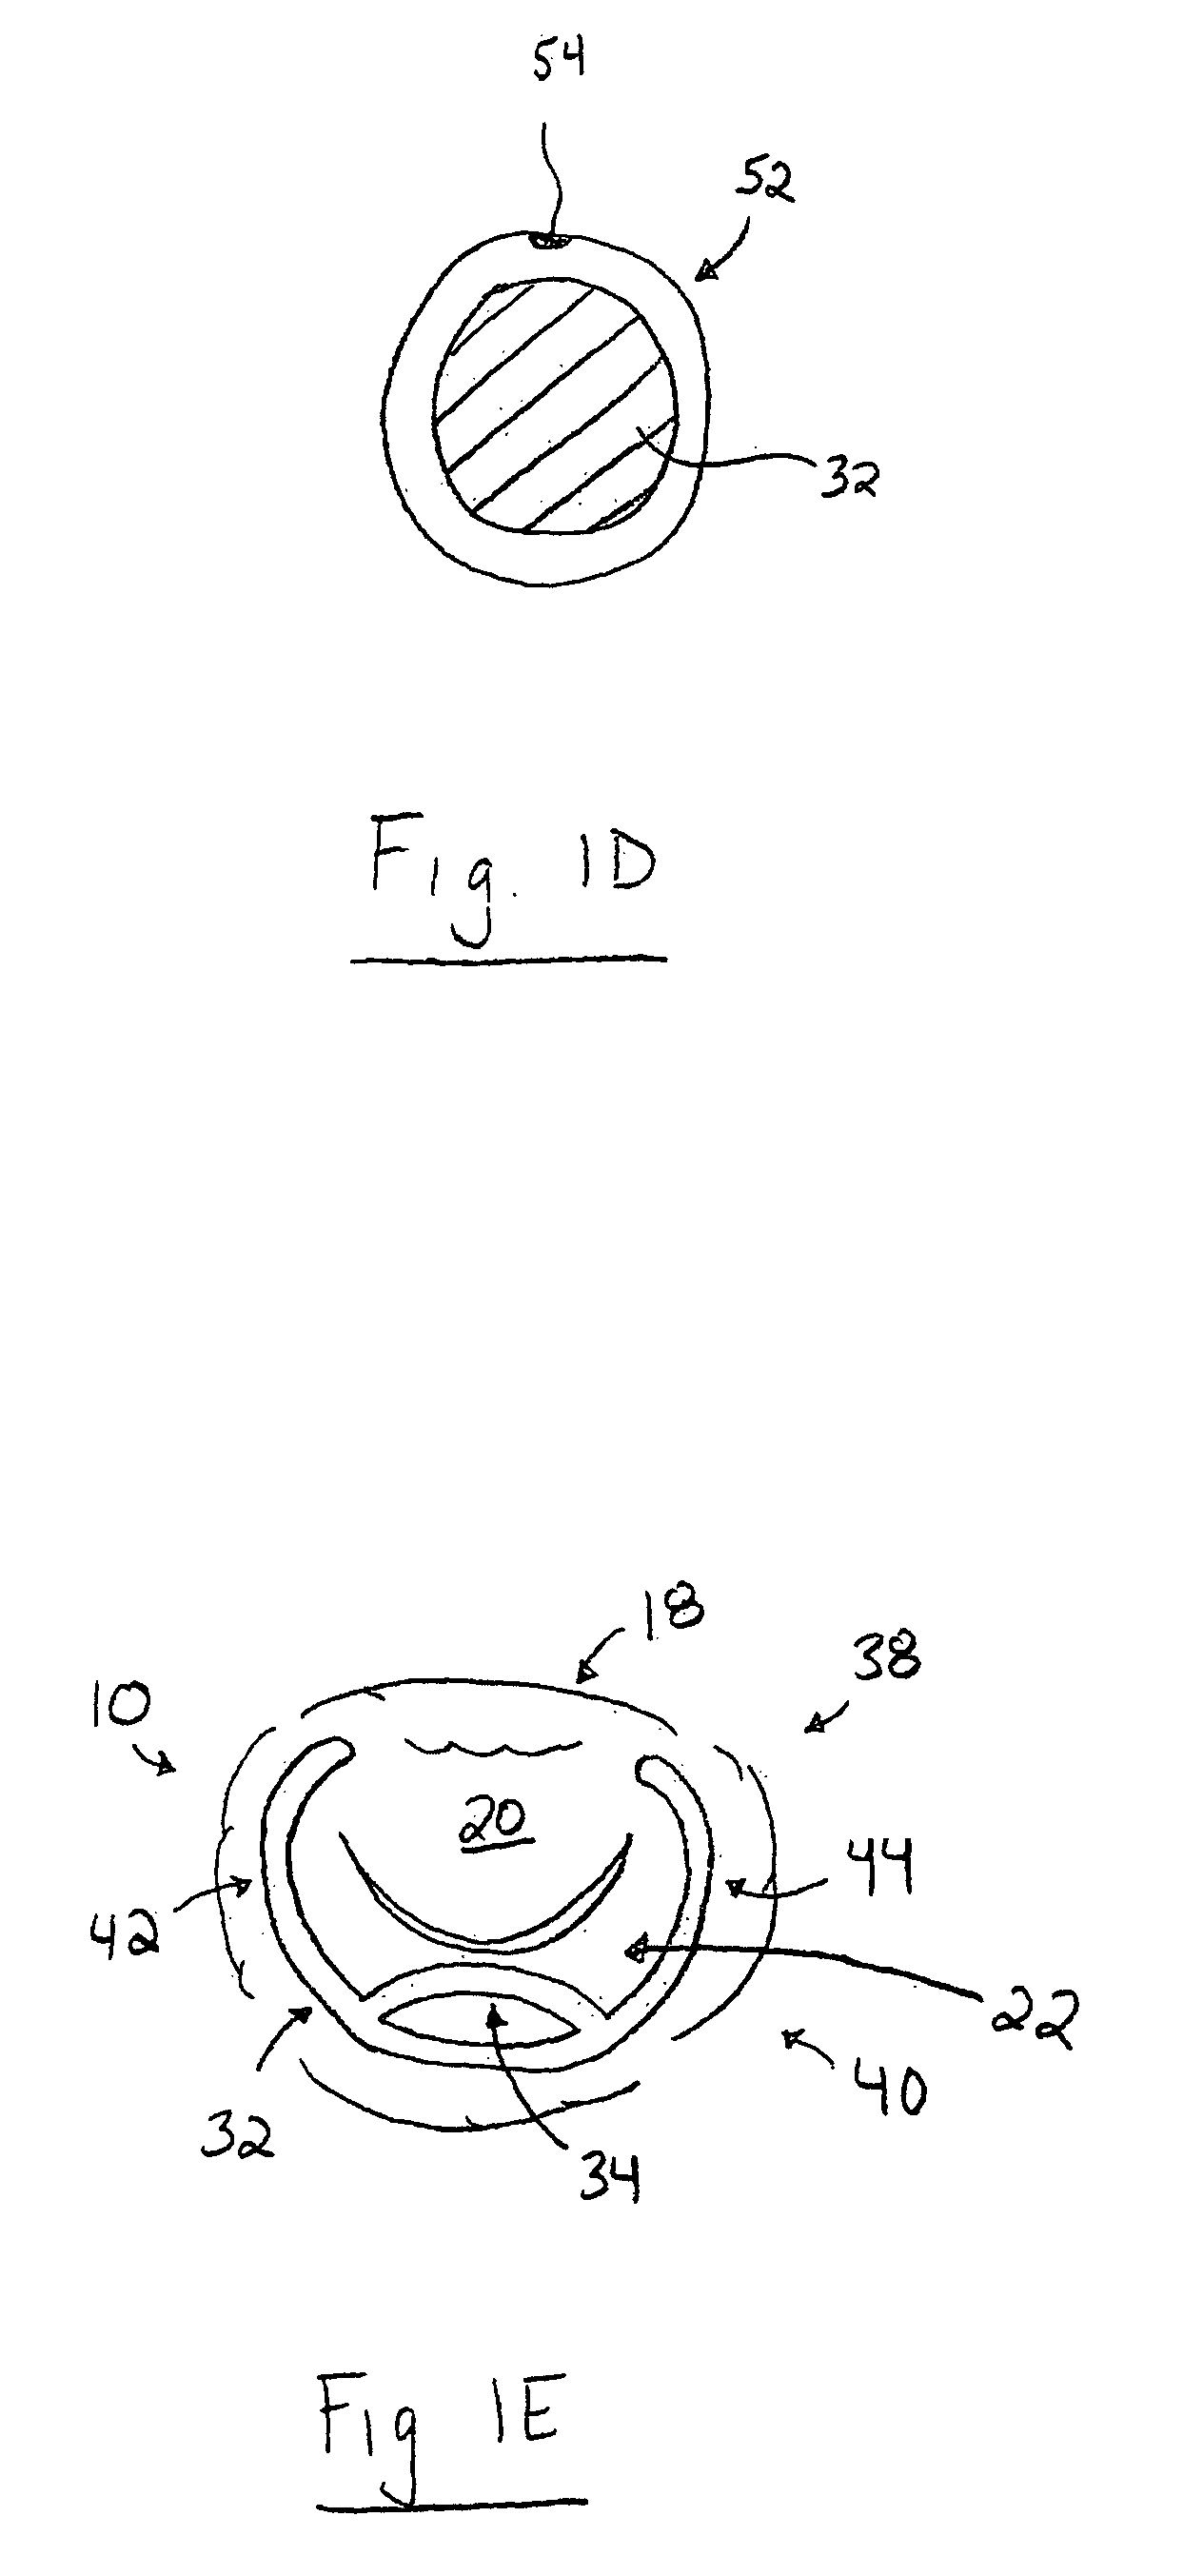 Apparatus and method for treating a regurgitant heart valve